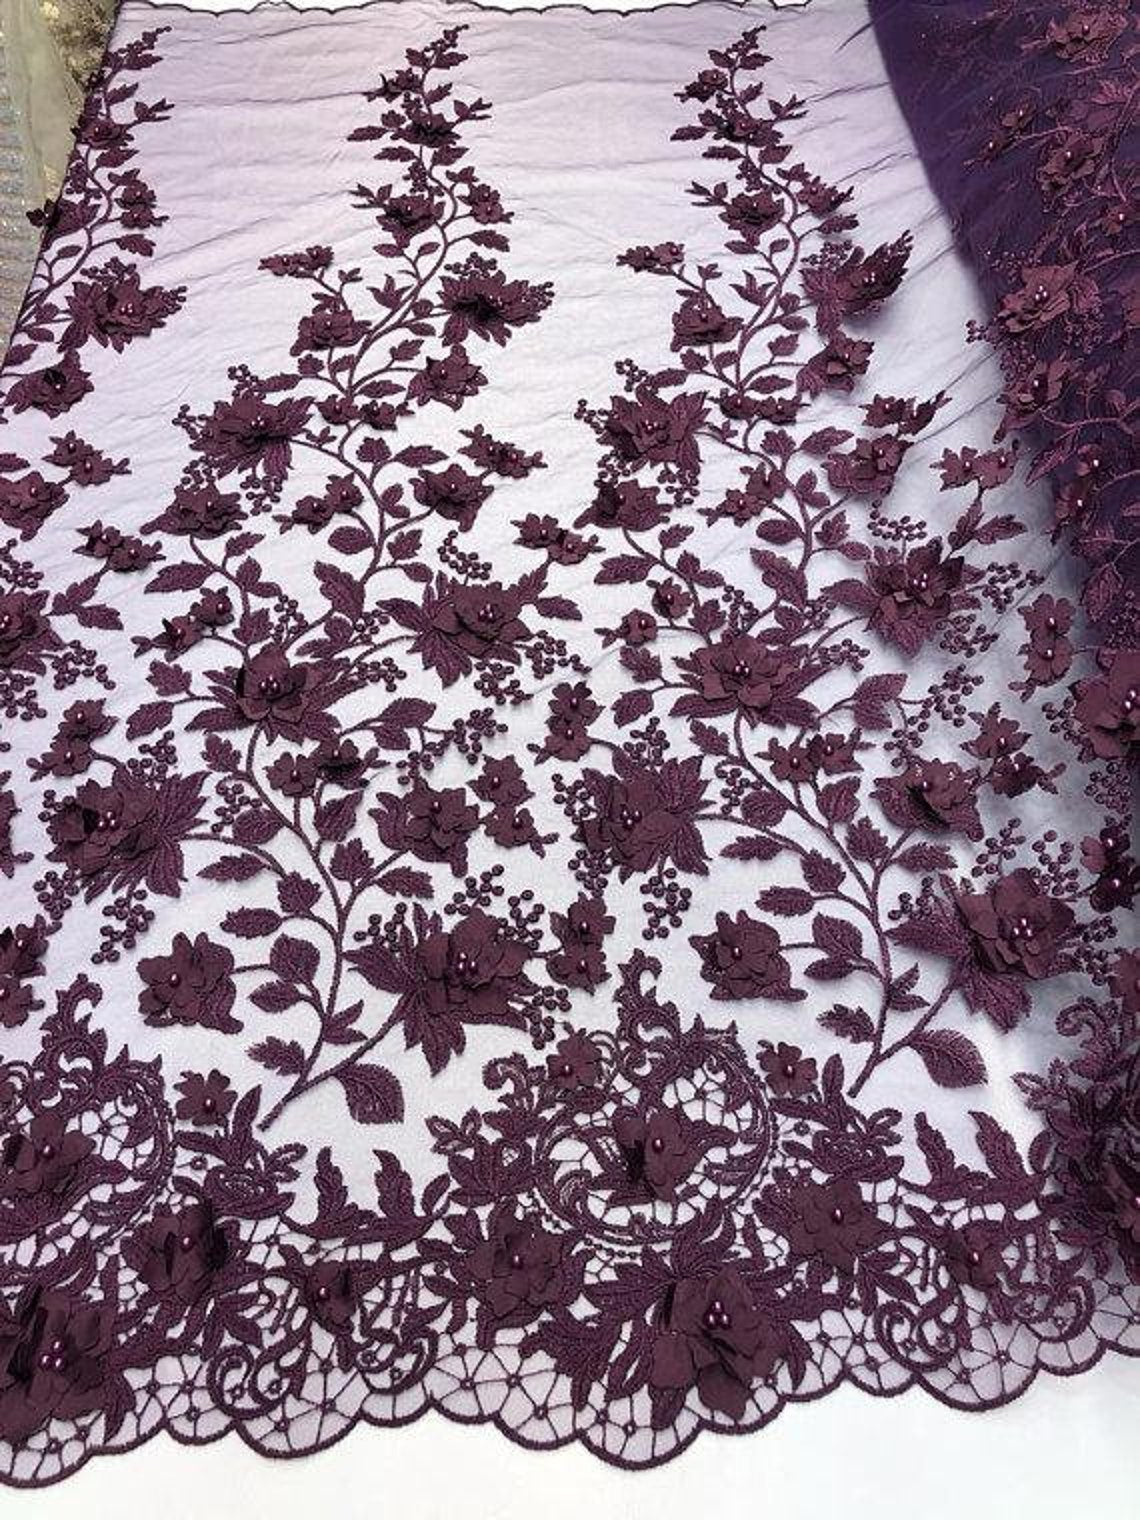 3D Floral Princess Fabric - Plum - Embroidered Floral Lace Fabric with 3D Flowers By Yard